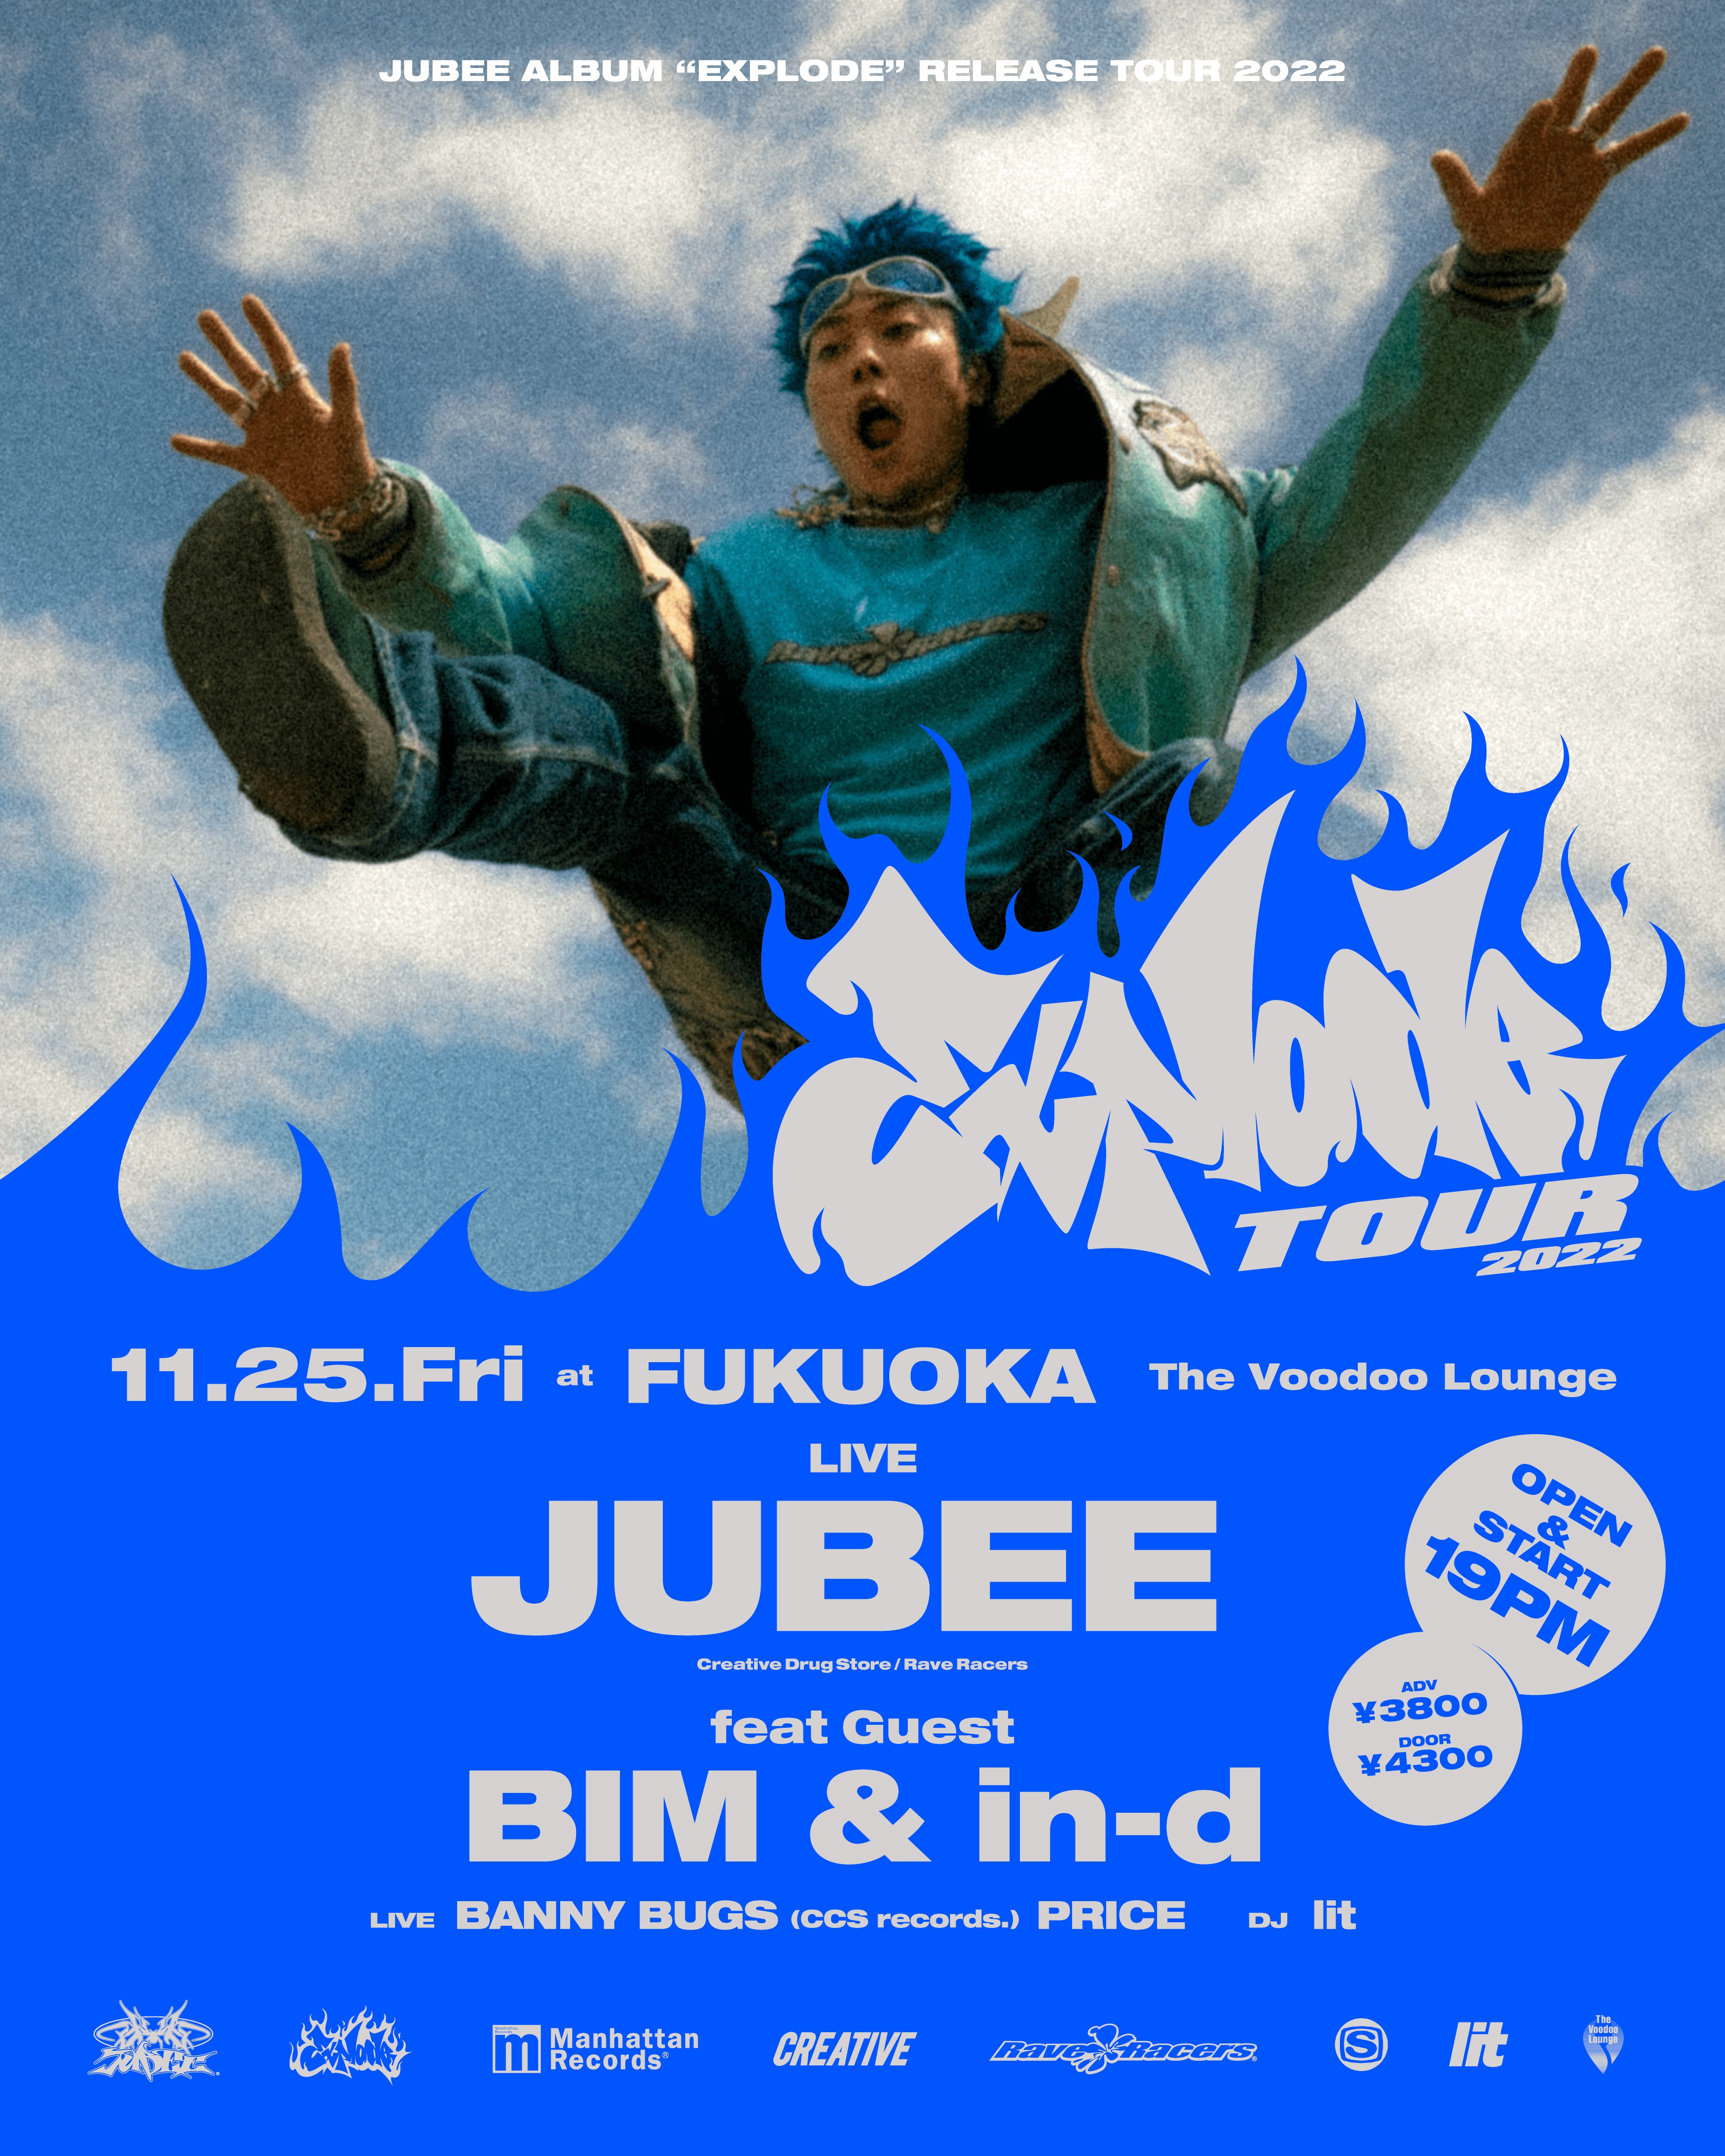 JUBEE(Creative Drug Store/Rave Racers/AFJB) による全国ツアー